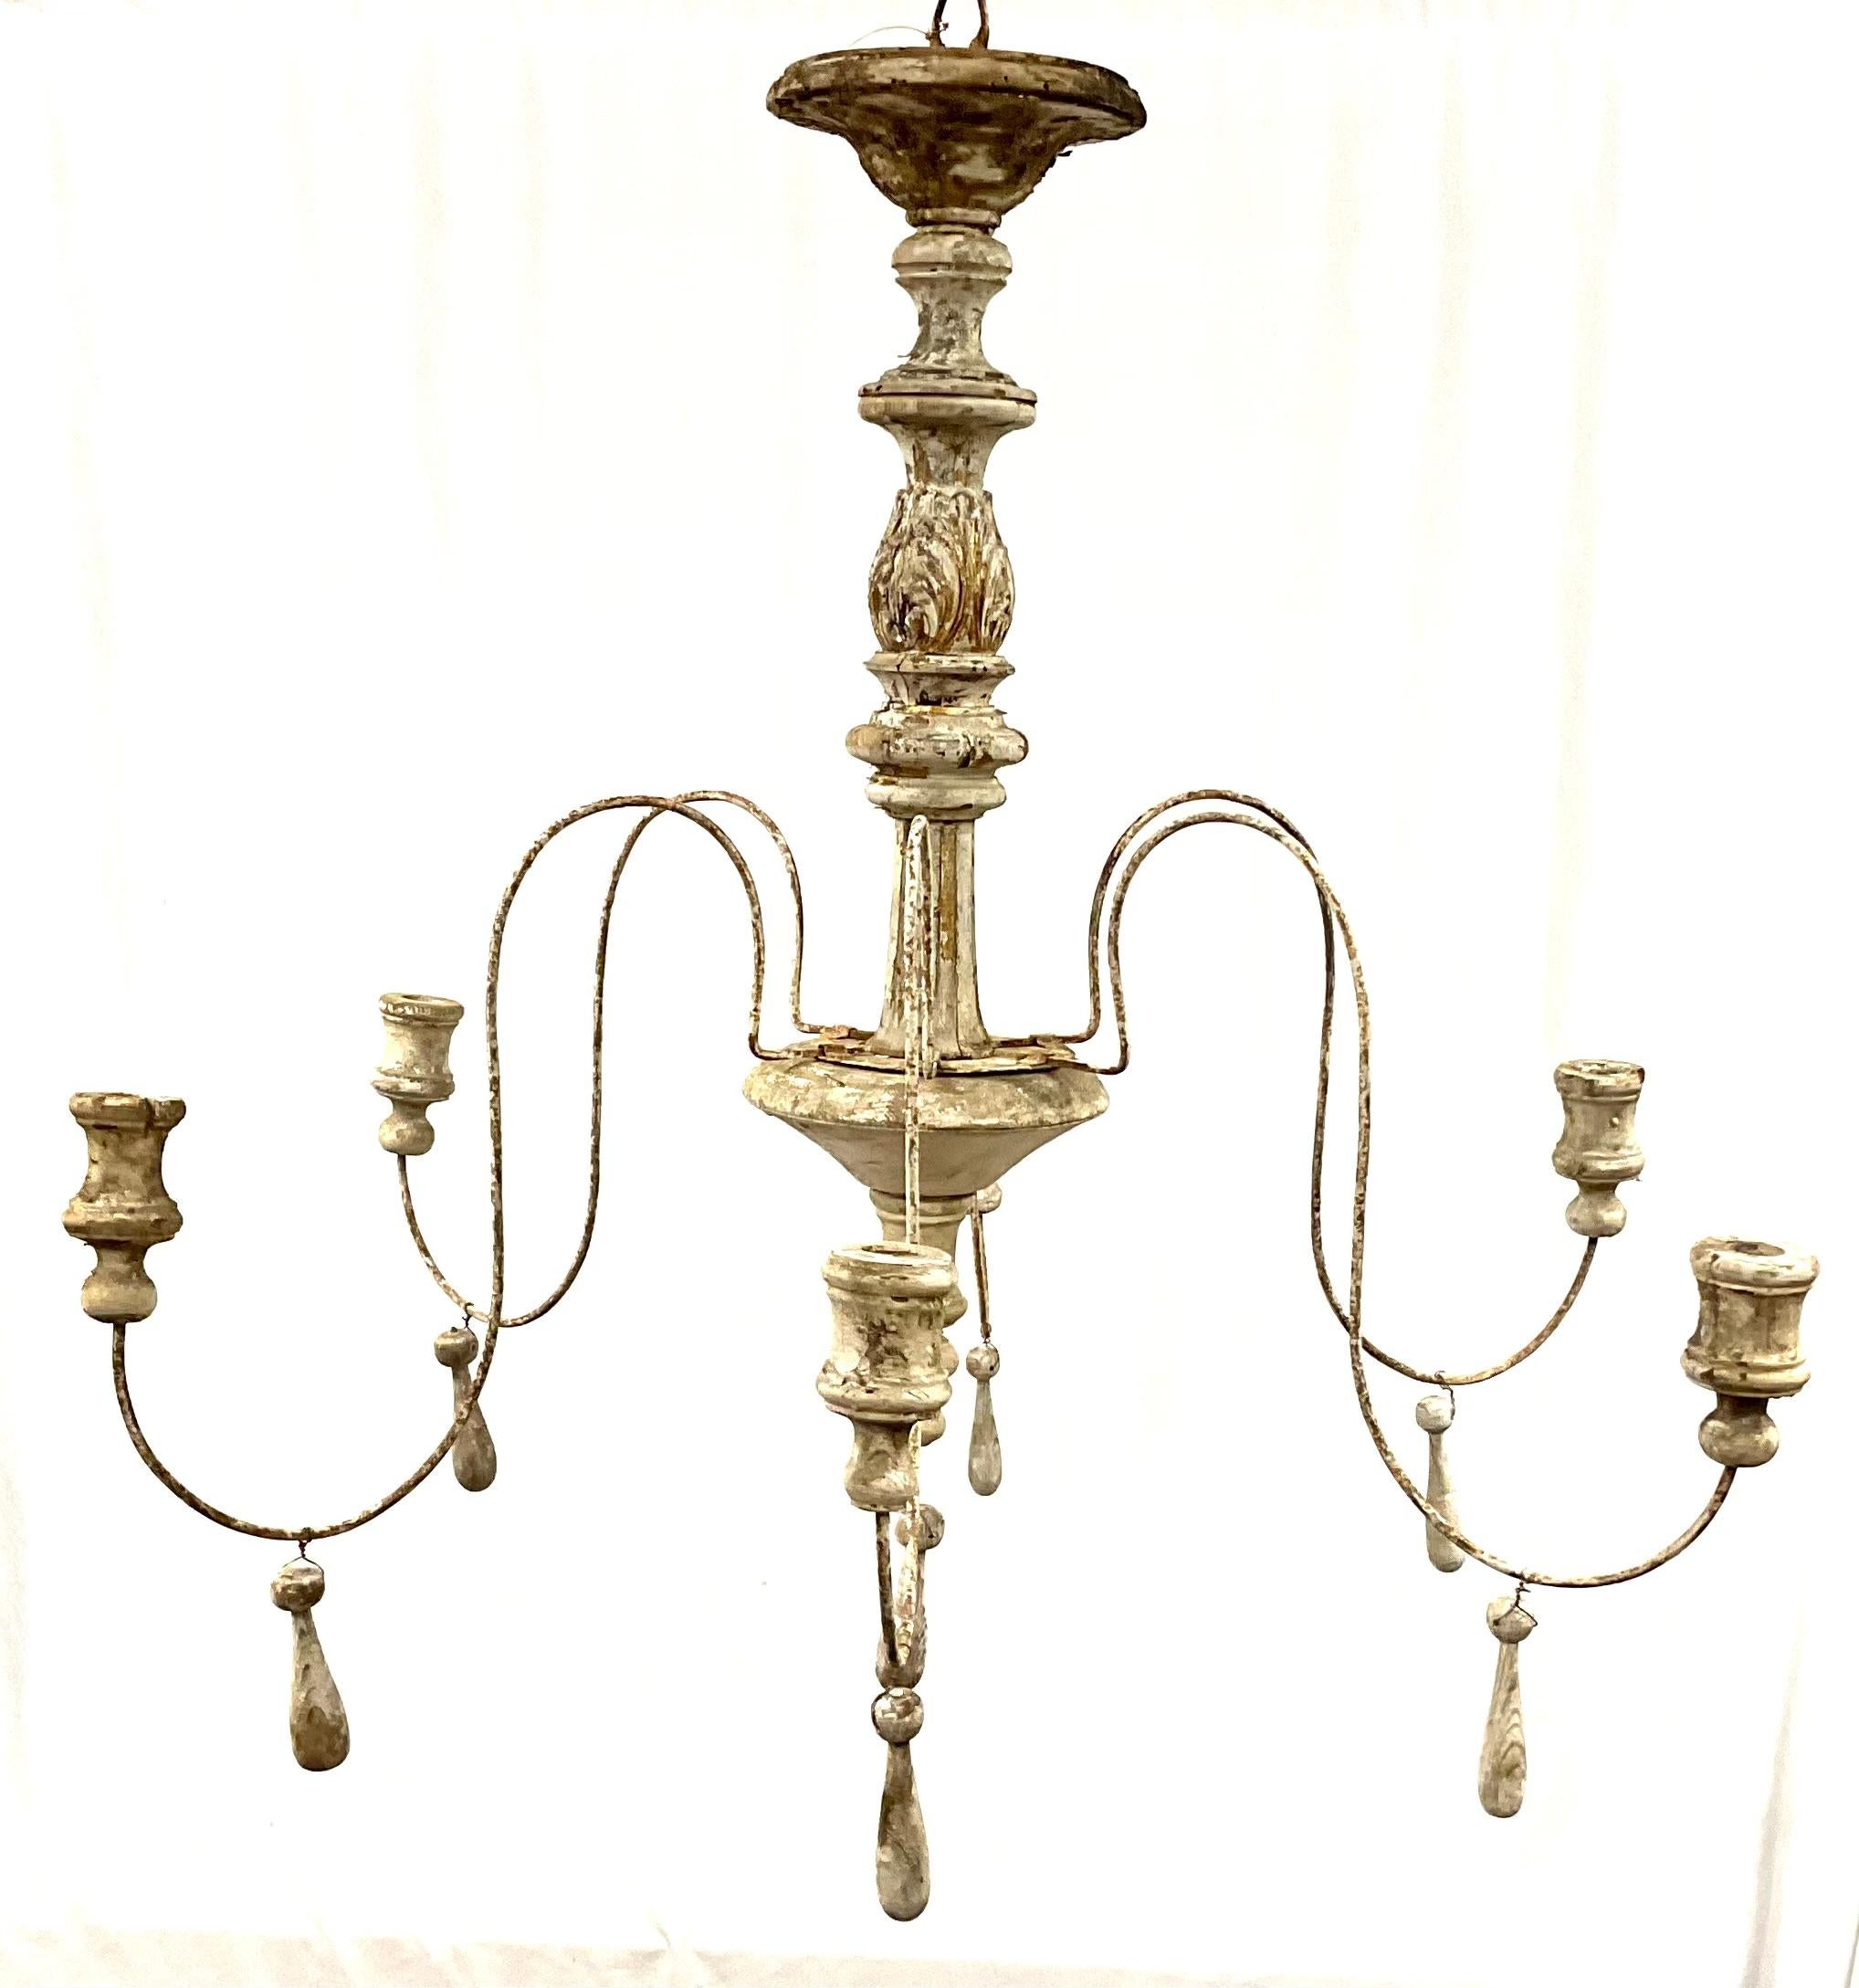 An Italian six arm chandelier comprised of antique elements. Aged patina and neutral colors. Scrolling wrought iron arms with carved and turned grey painted wood baluster, gilt wood tassel and bell hanging decoration, all now with a wonderful aged